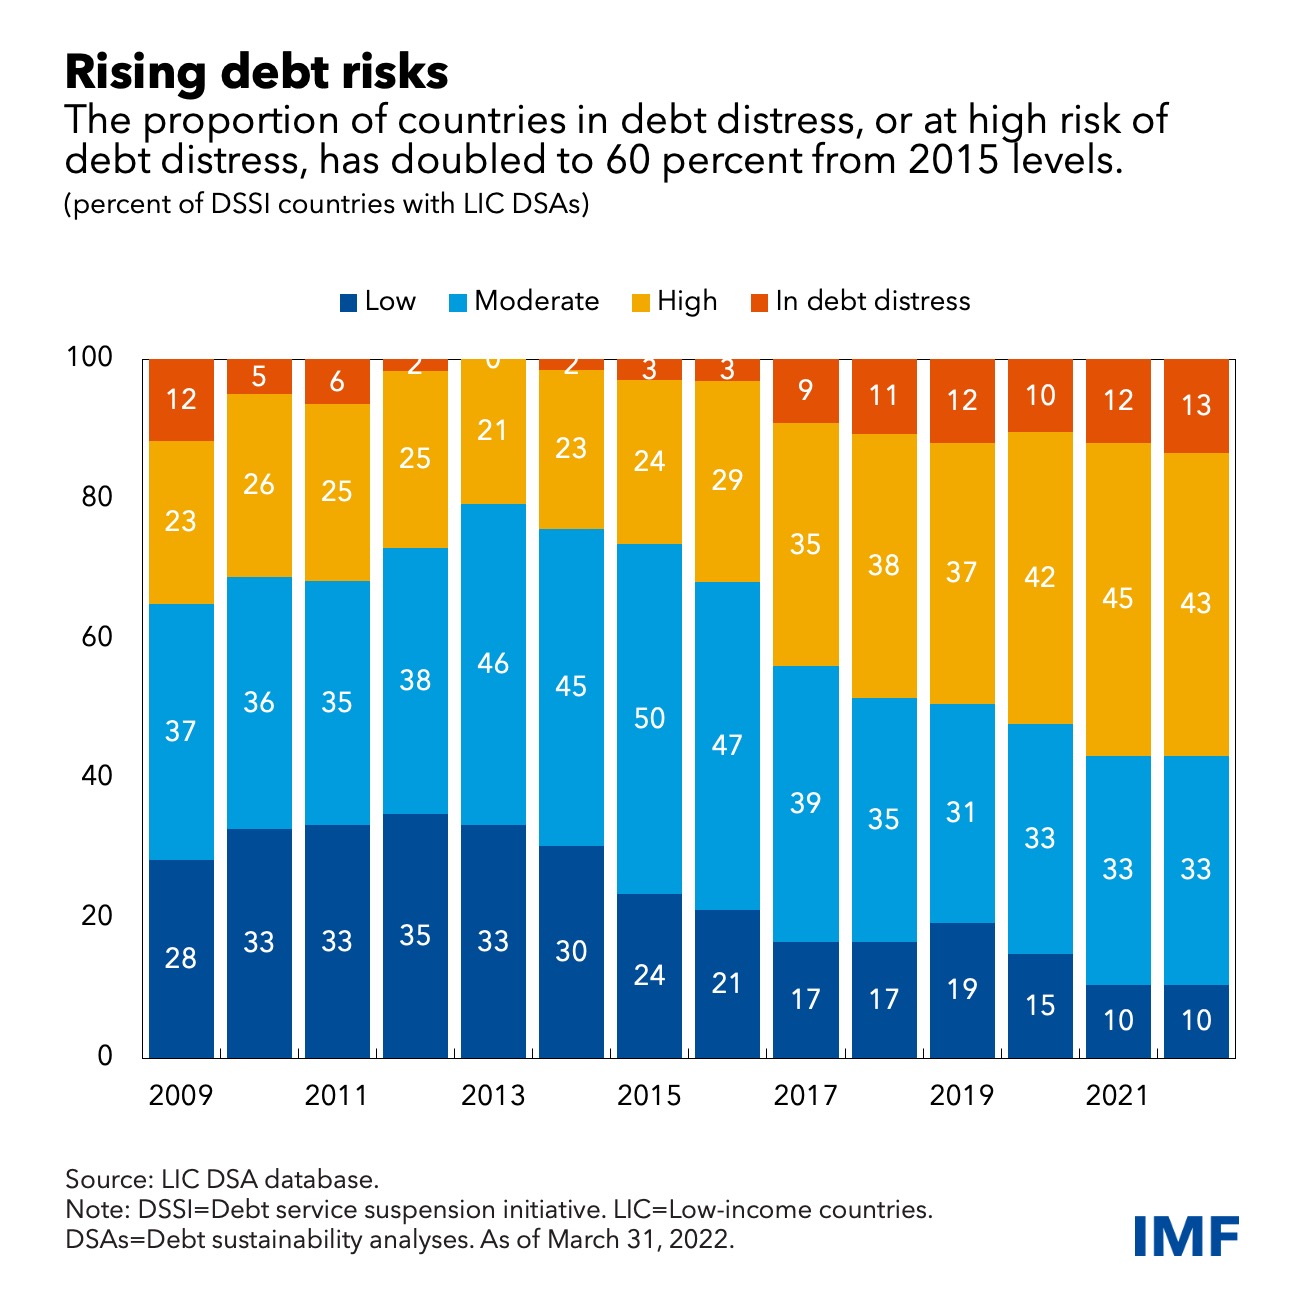 chart showing the proportion of countries in varying levels of debt distress